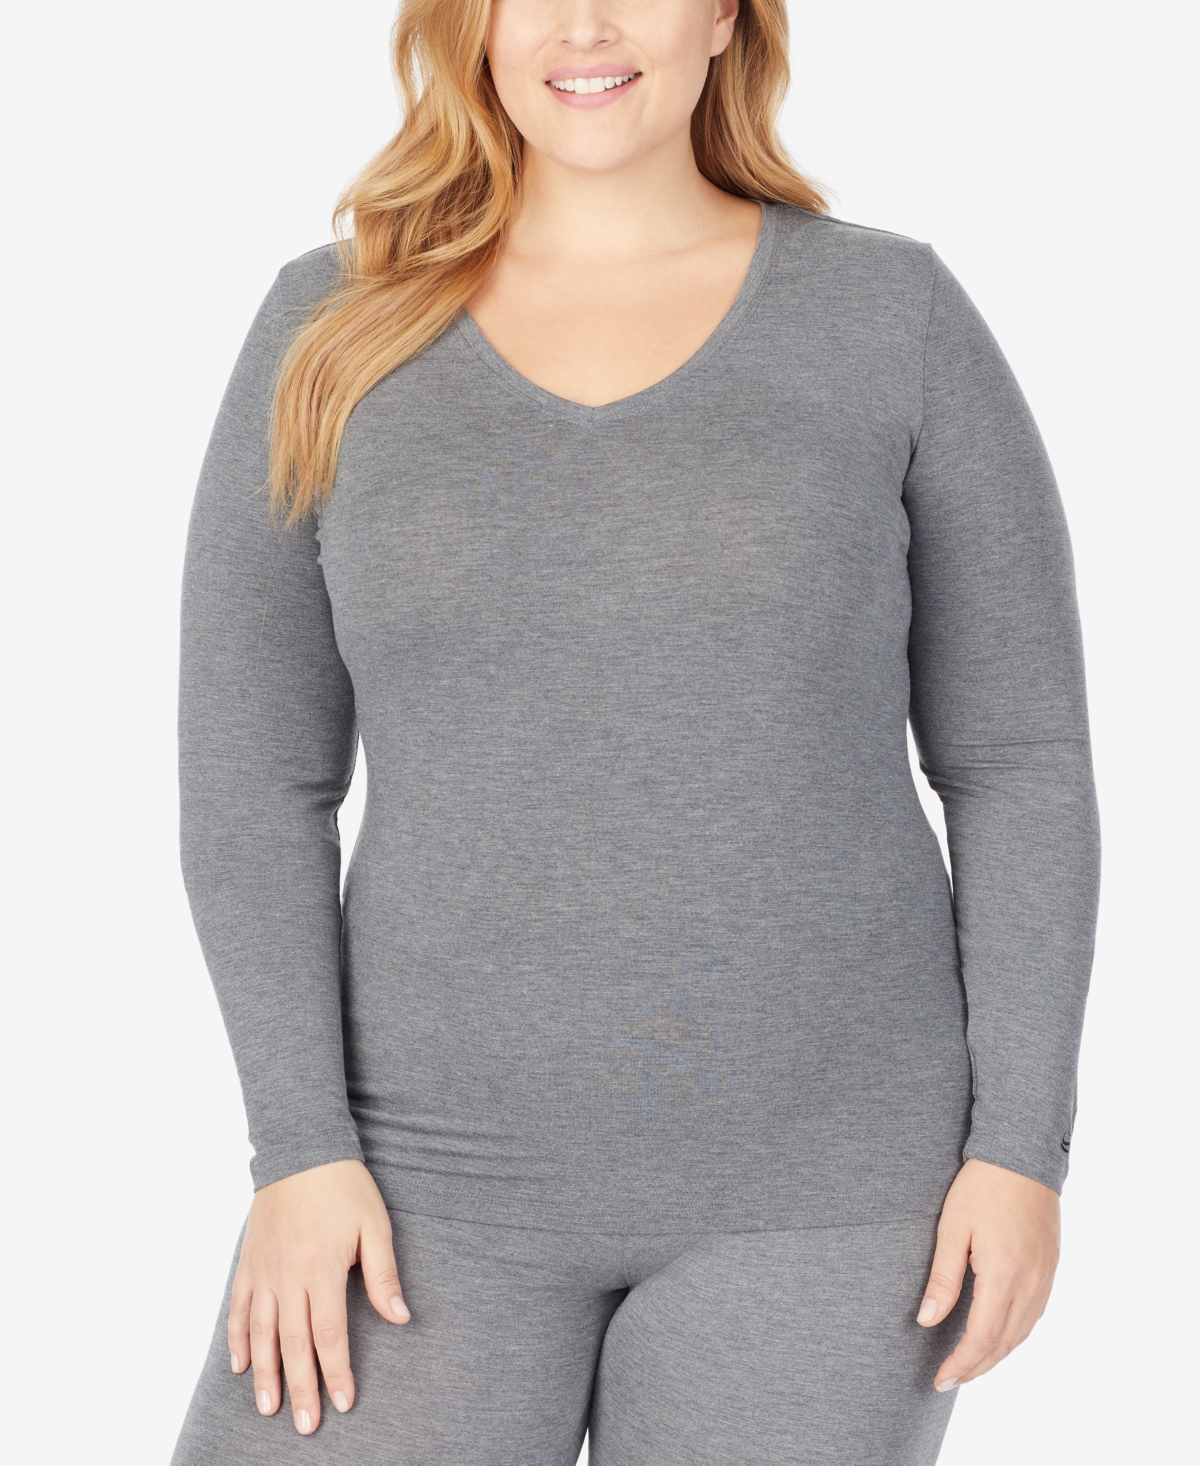 Plus Size Softwear with Stretch V-Neck Top - Black